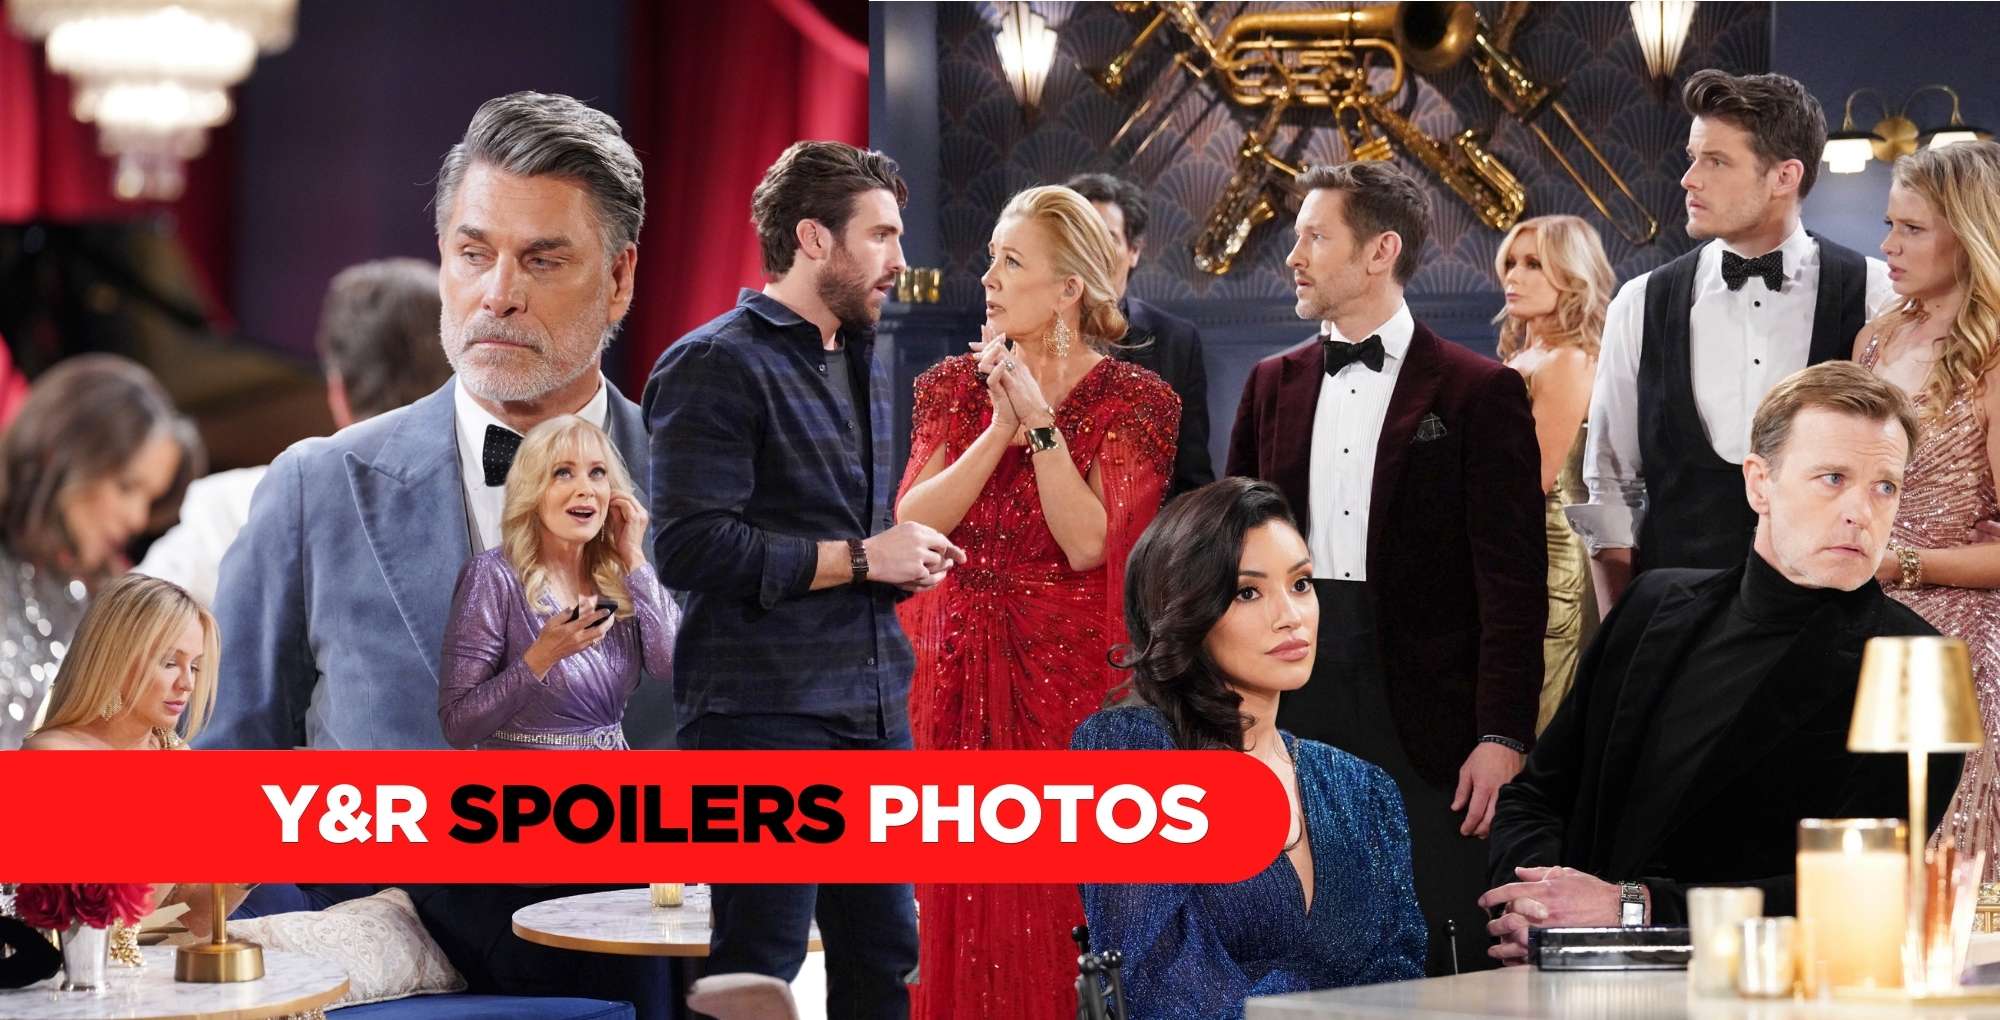 y&r spoilers photos for march 31.